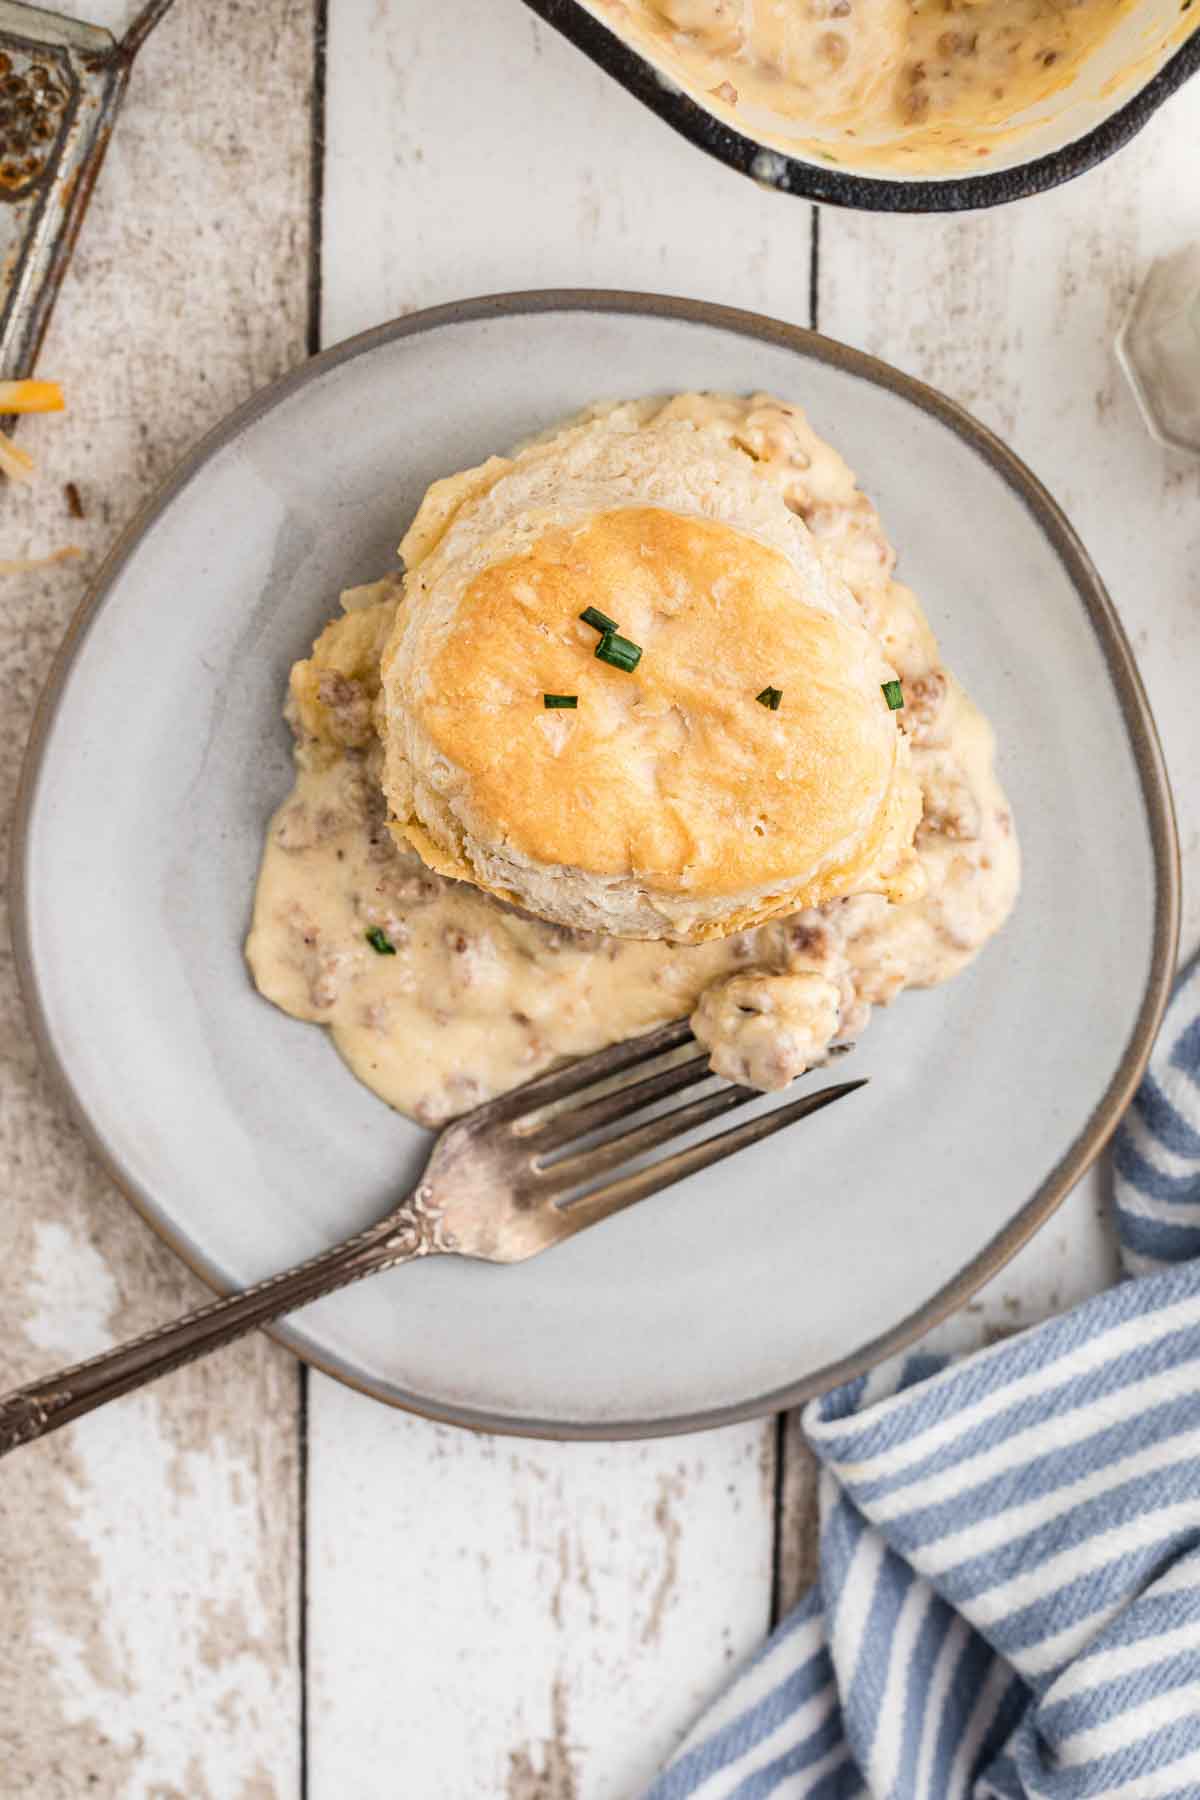 A plate with a biscuits and gravy casserole on it.